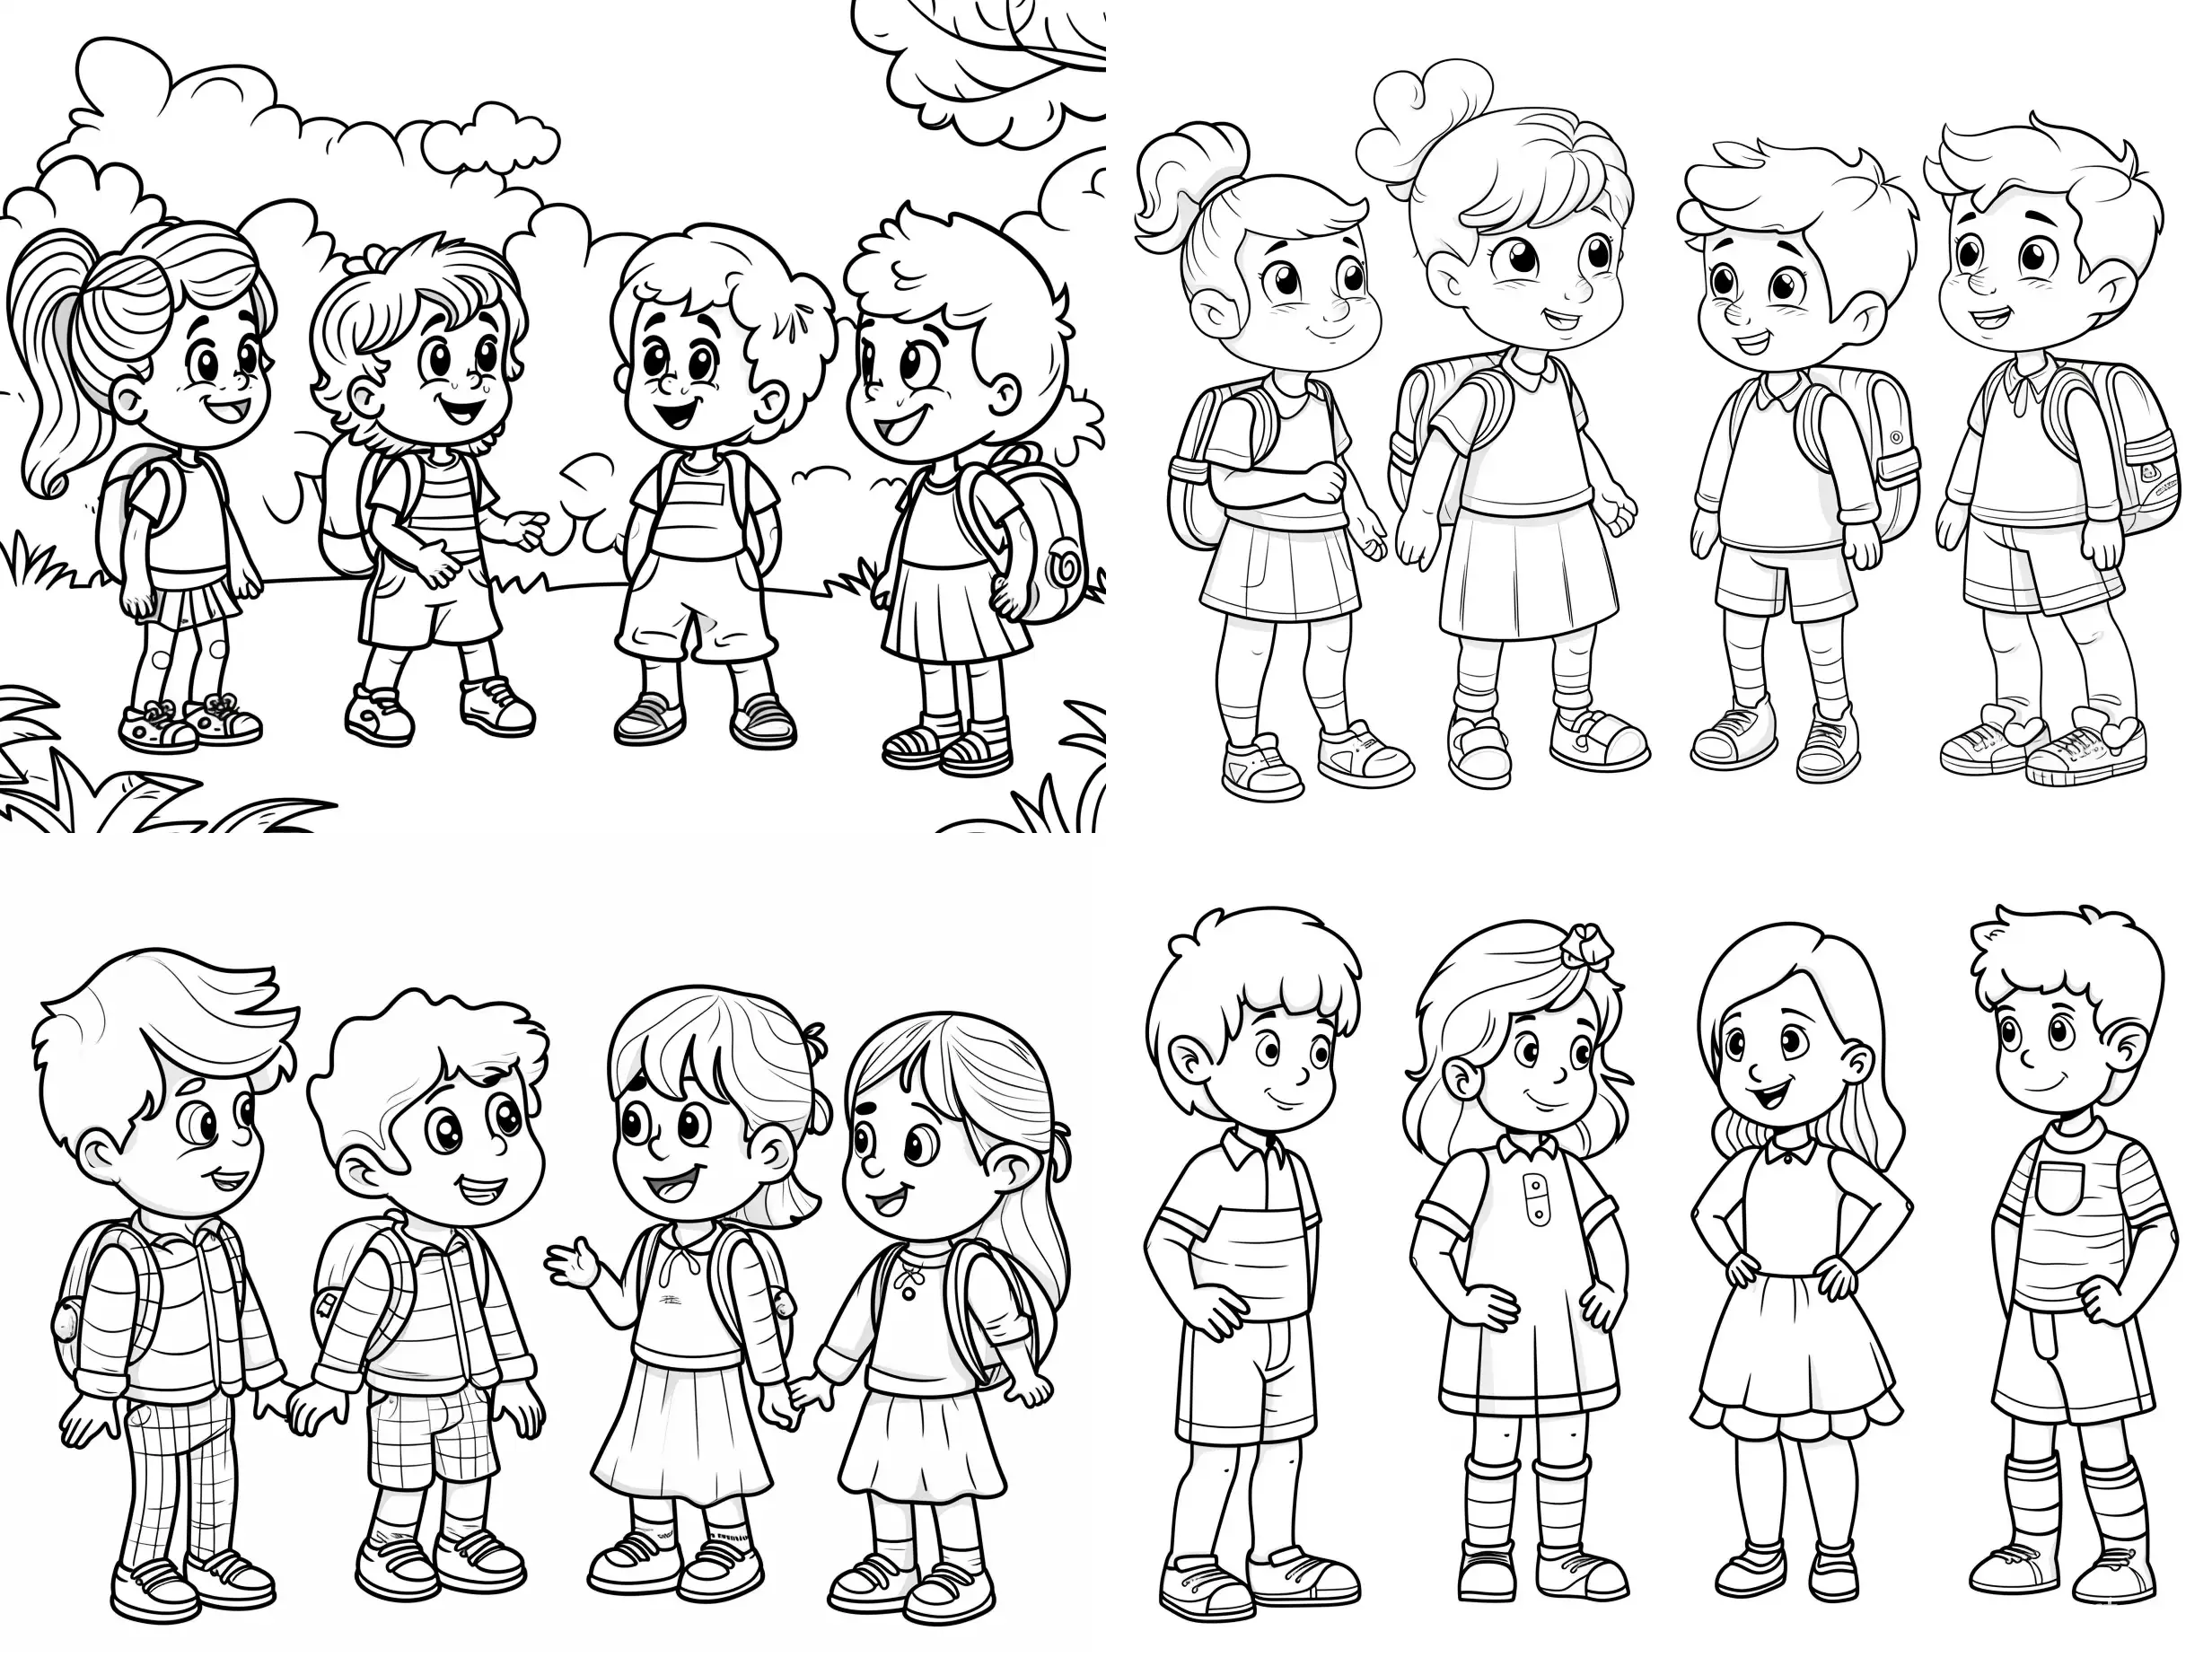 coloring page for kids, detailed, simply cartoon style, isolated, funny, classmate meeting 